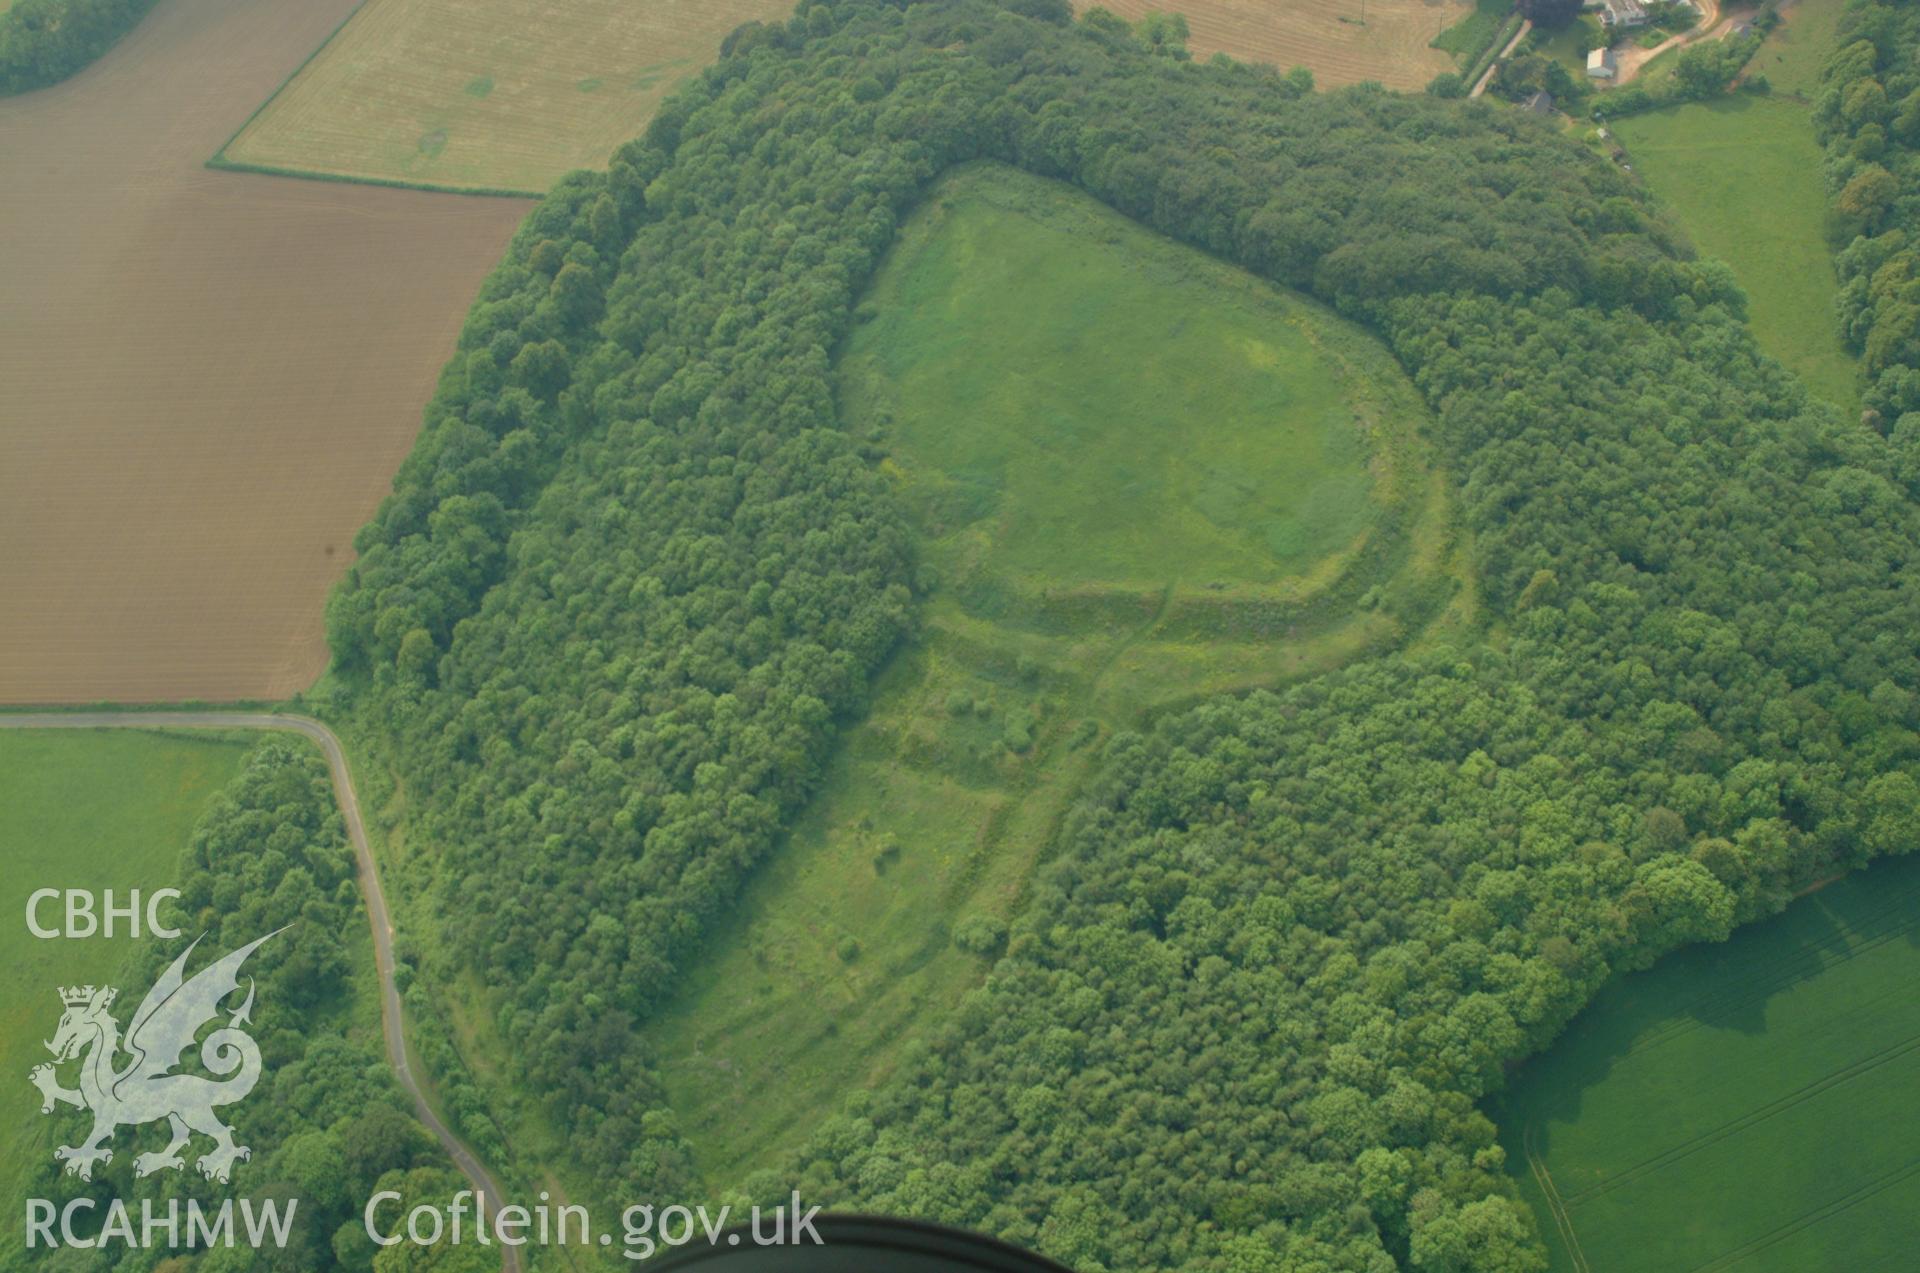 RCAHMW colour oblique aerial photograph of Llanmelin Wood Hillfort taken on 26/05/2004 by Toby Driver